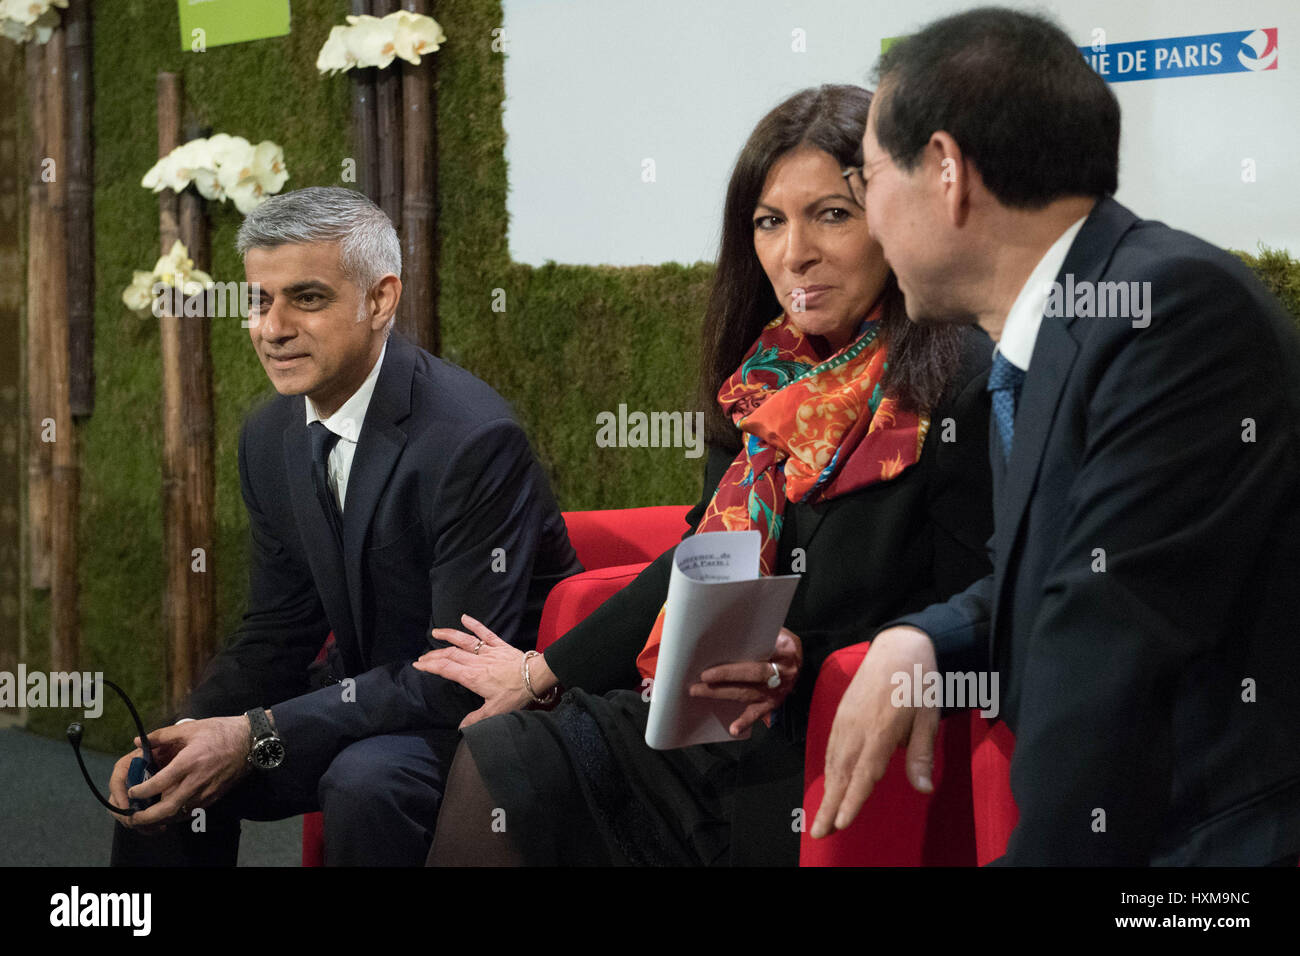 Mayor of London Sadiq Khan attends an air quality event with Mayor Anne Hidalgo and Mayor of Seoul, Park Won-soon at Hotel de Ville in Paris where they discussed how to reduce pollution in the world's cities. Stock Photo